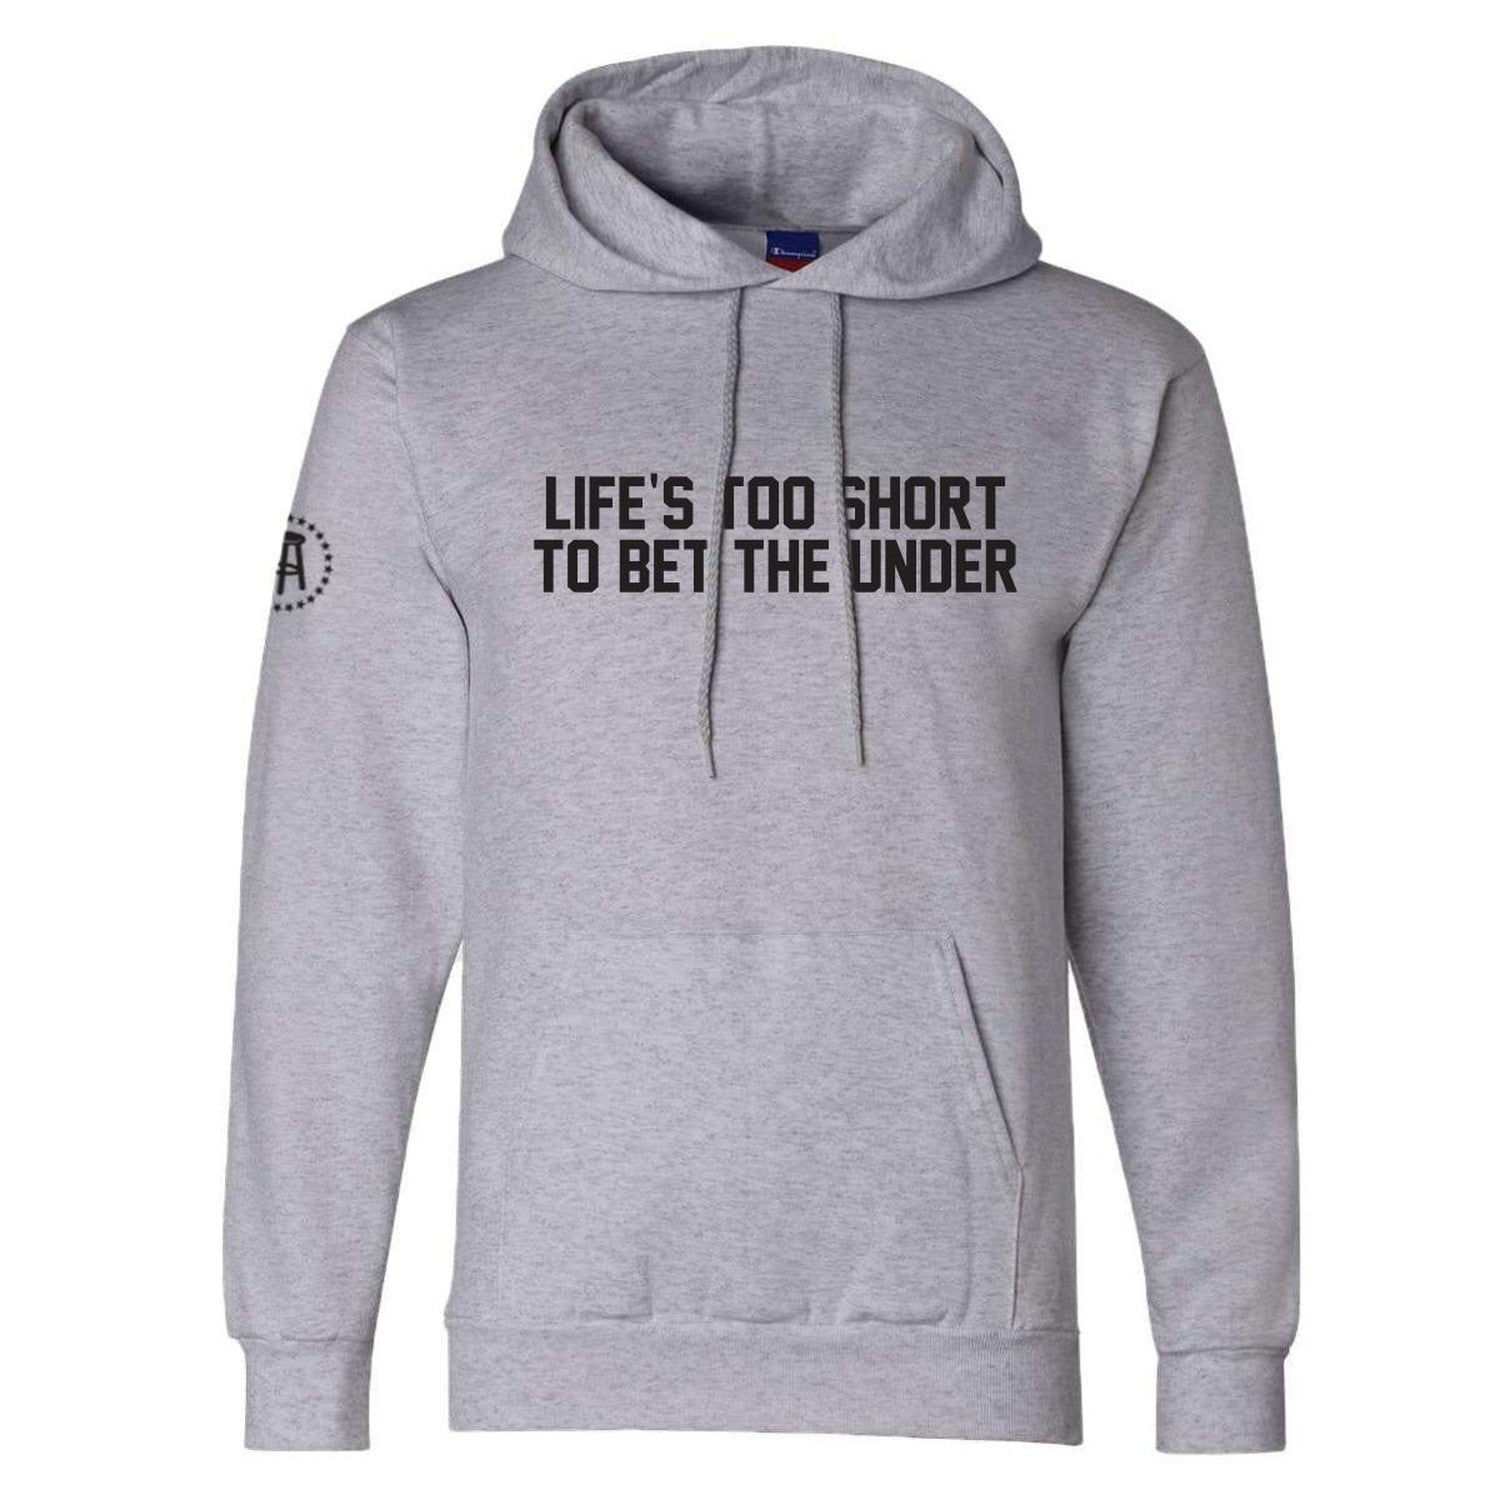 Life's Too Short To Bet The Under Hoodie-Hoodies-Barstool Sports-Grey-S-Barstool Sports